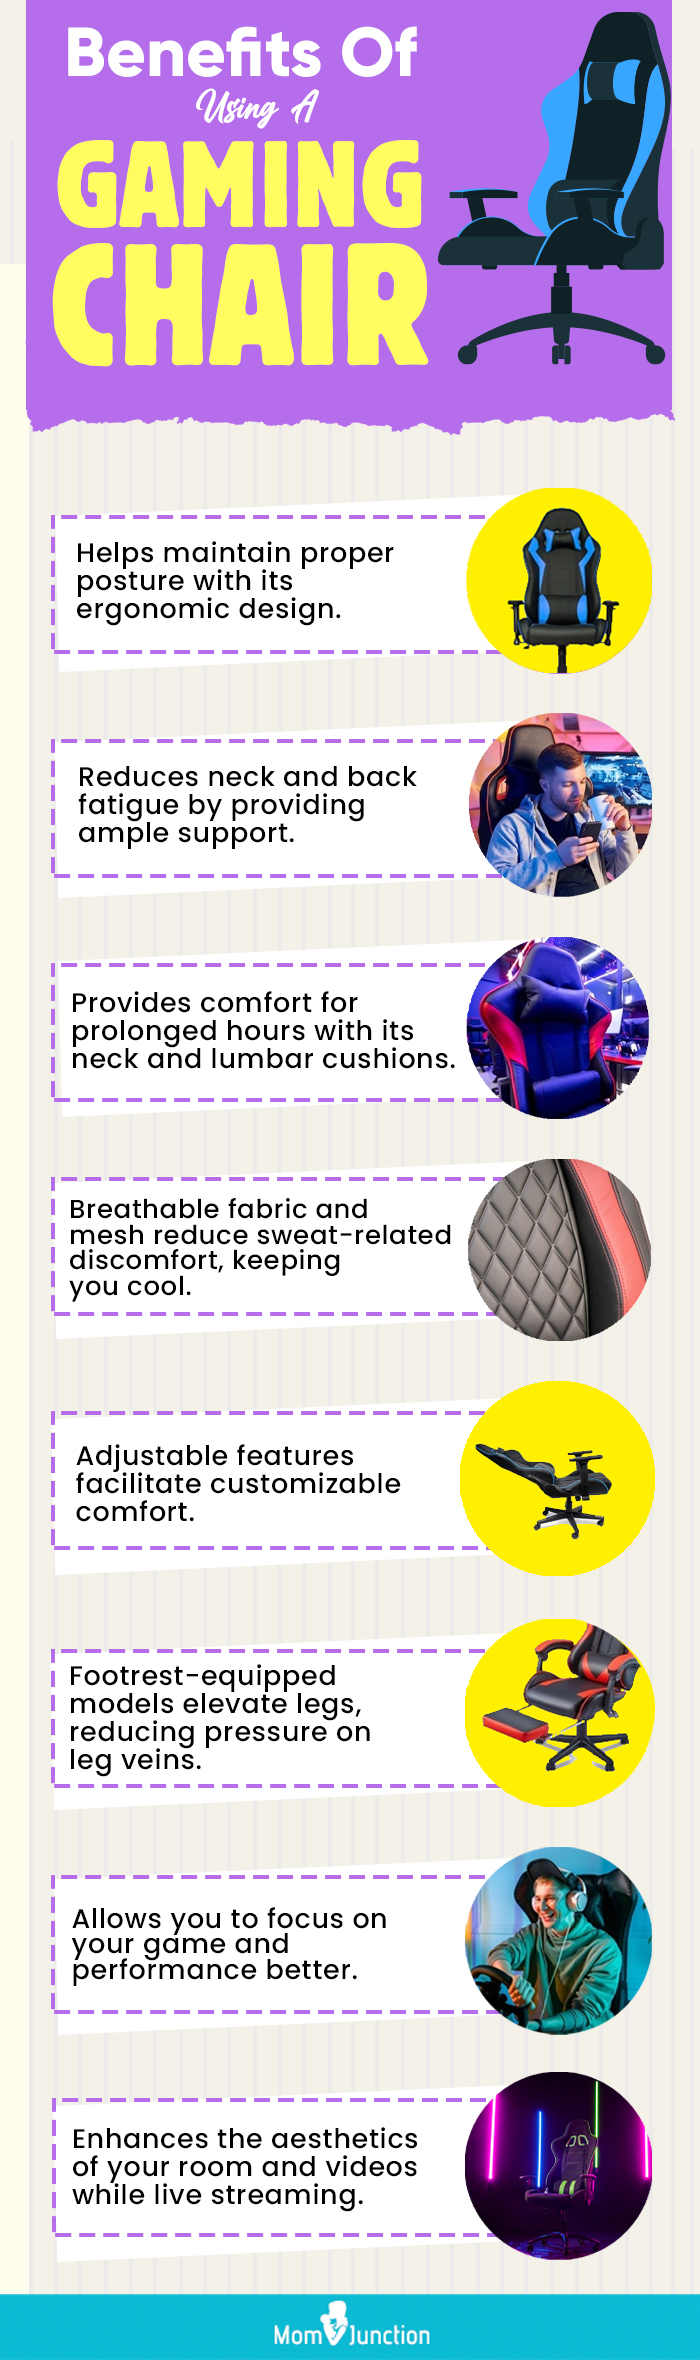 Benefits Of Using A Gaming Chair (infographic)